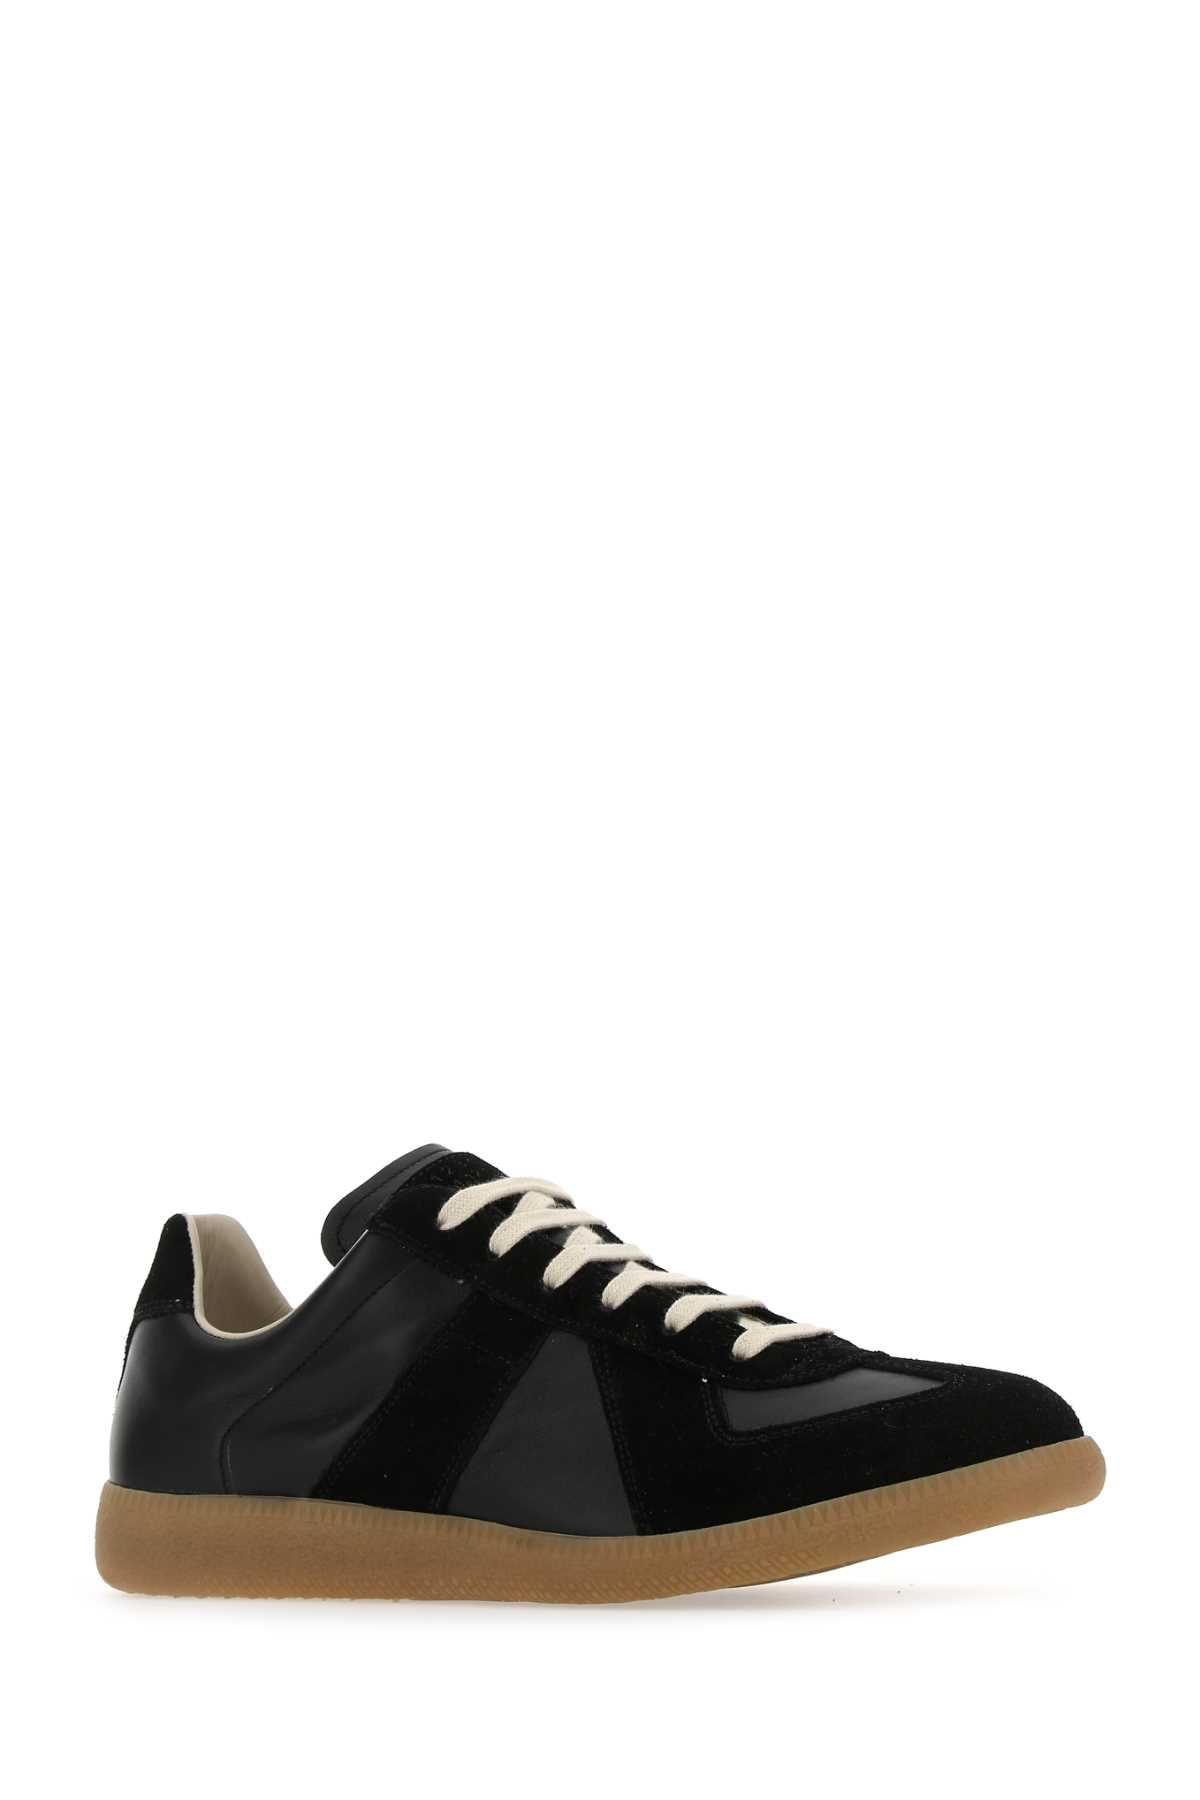 Shop Maison Margiela Black Leather And Suede Replica Sneakers In H6851